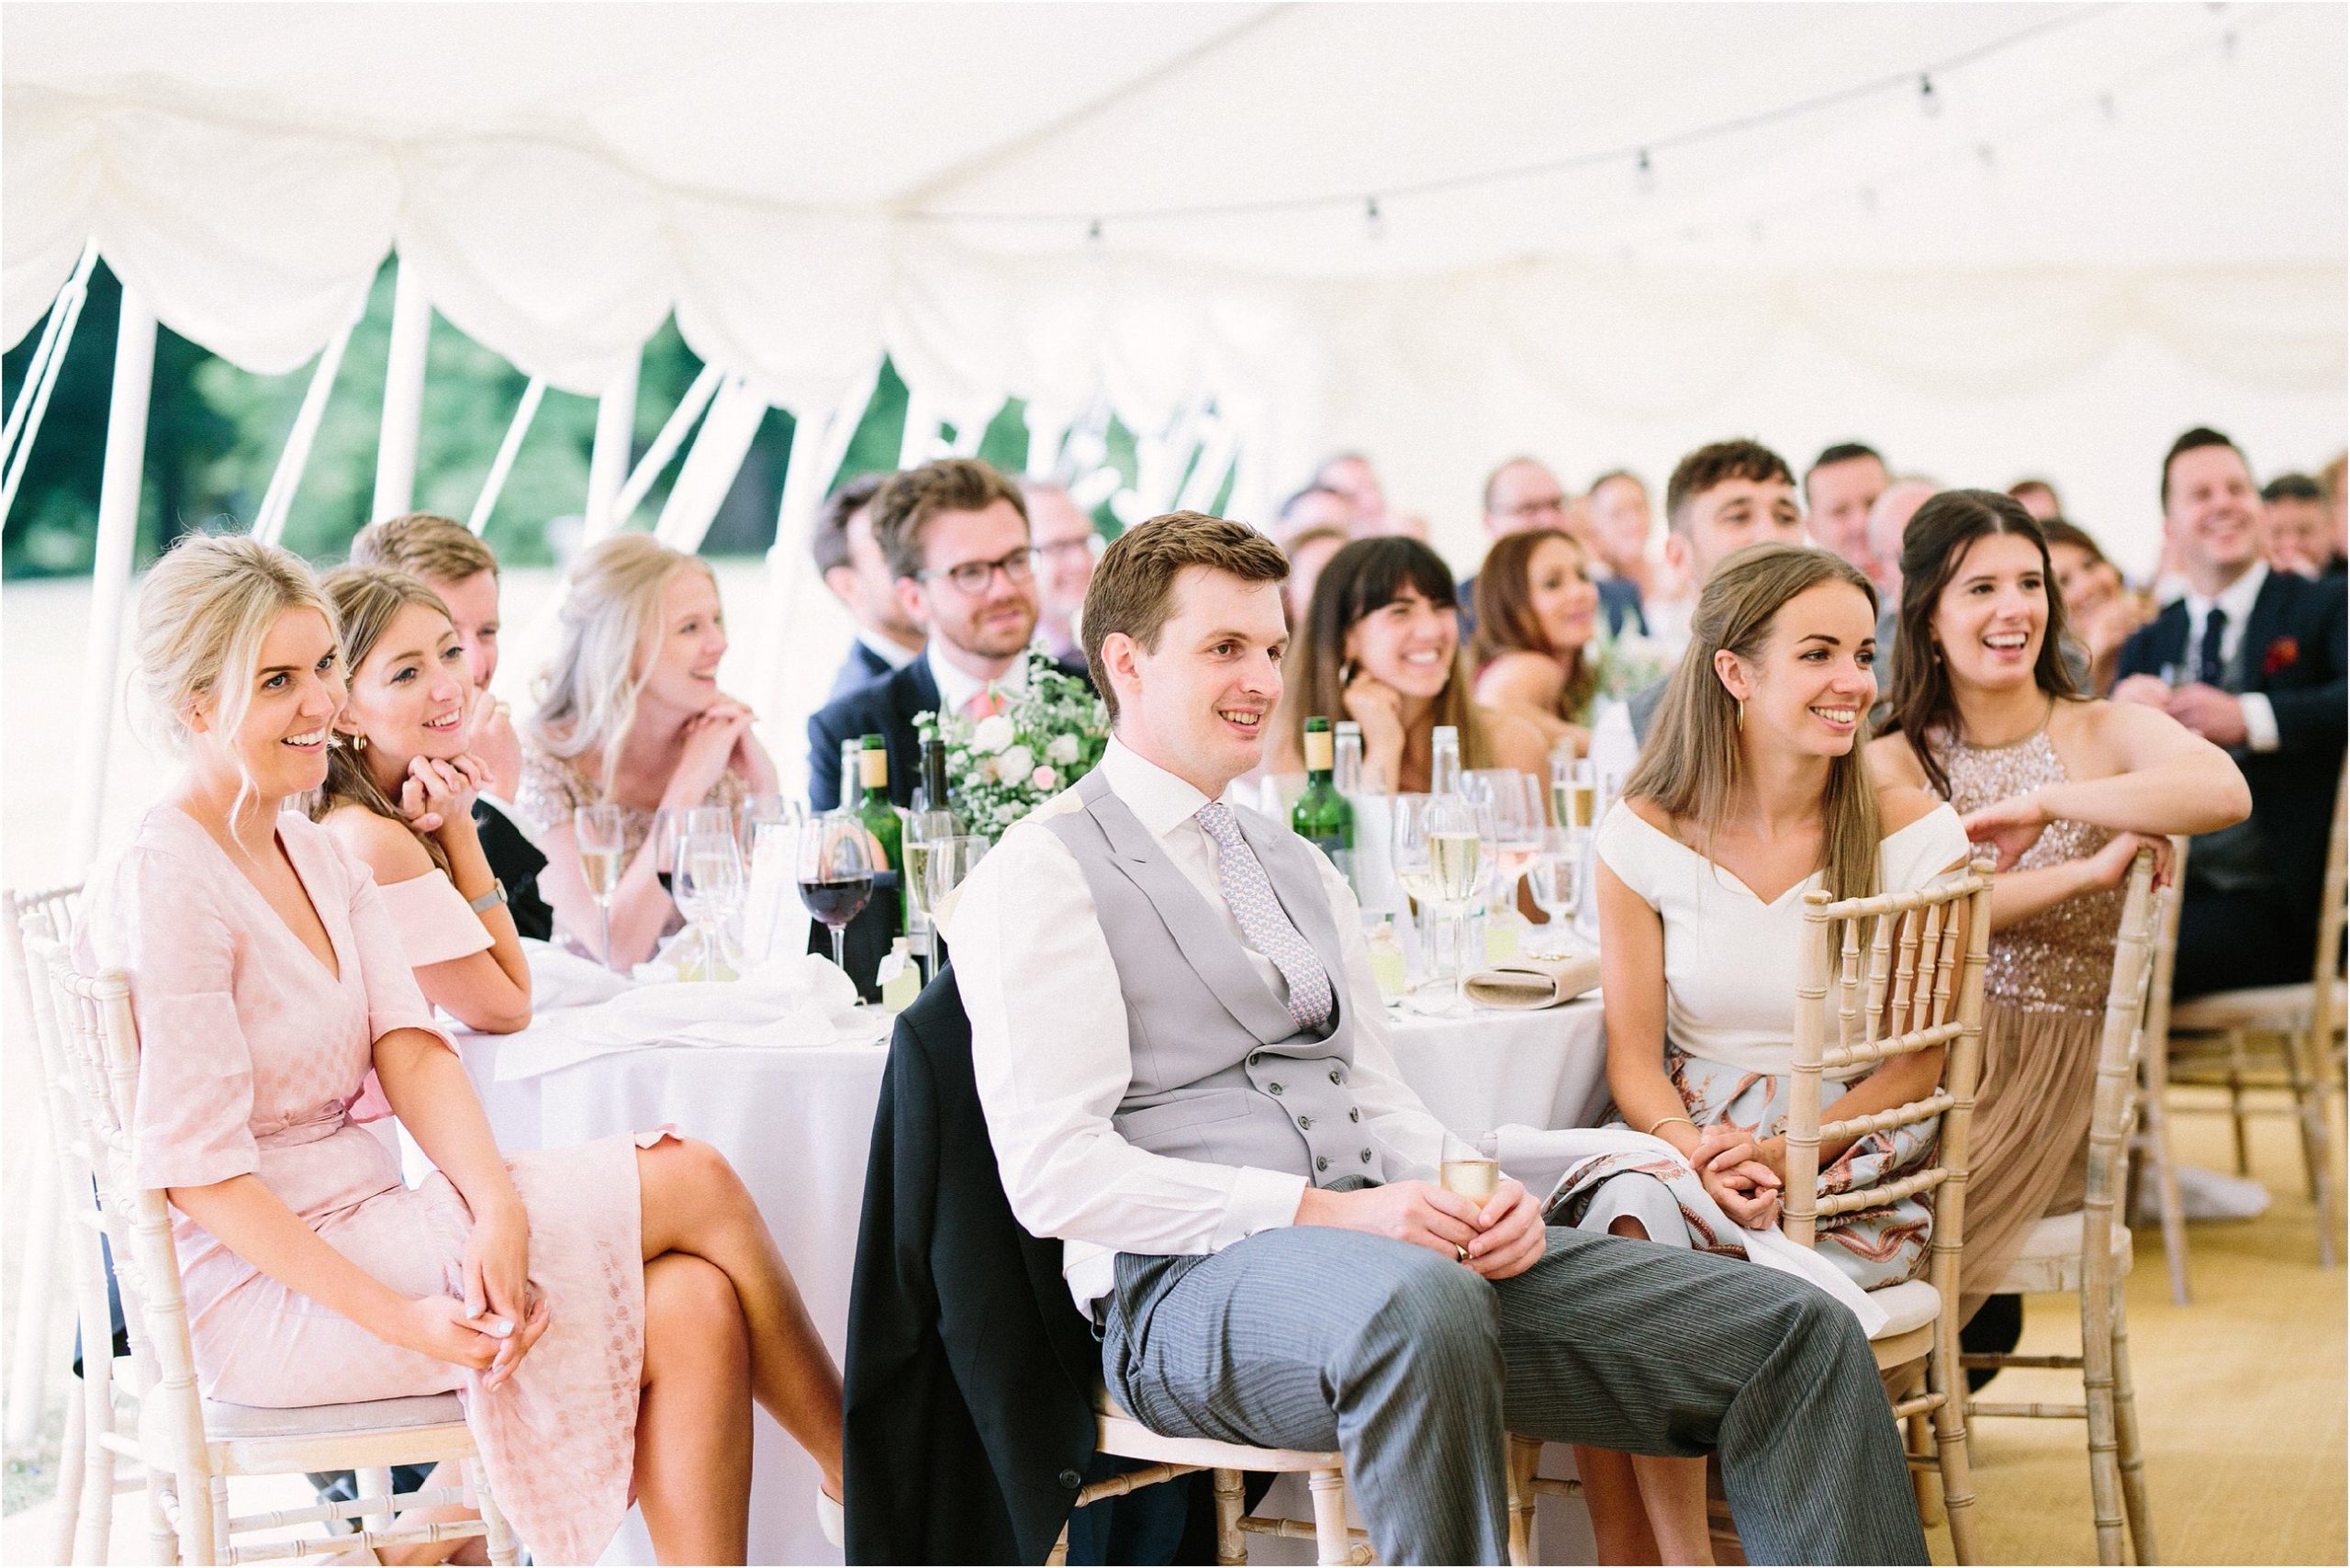 Guests smiling listening to wedding speech